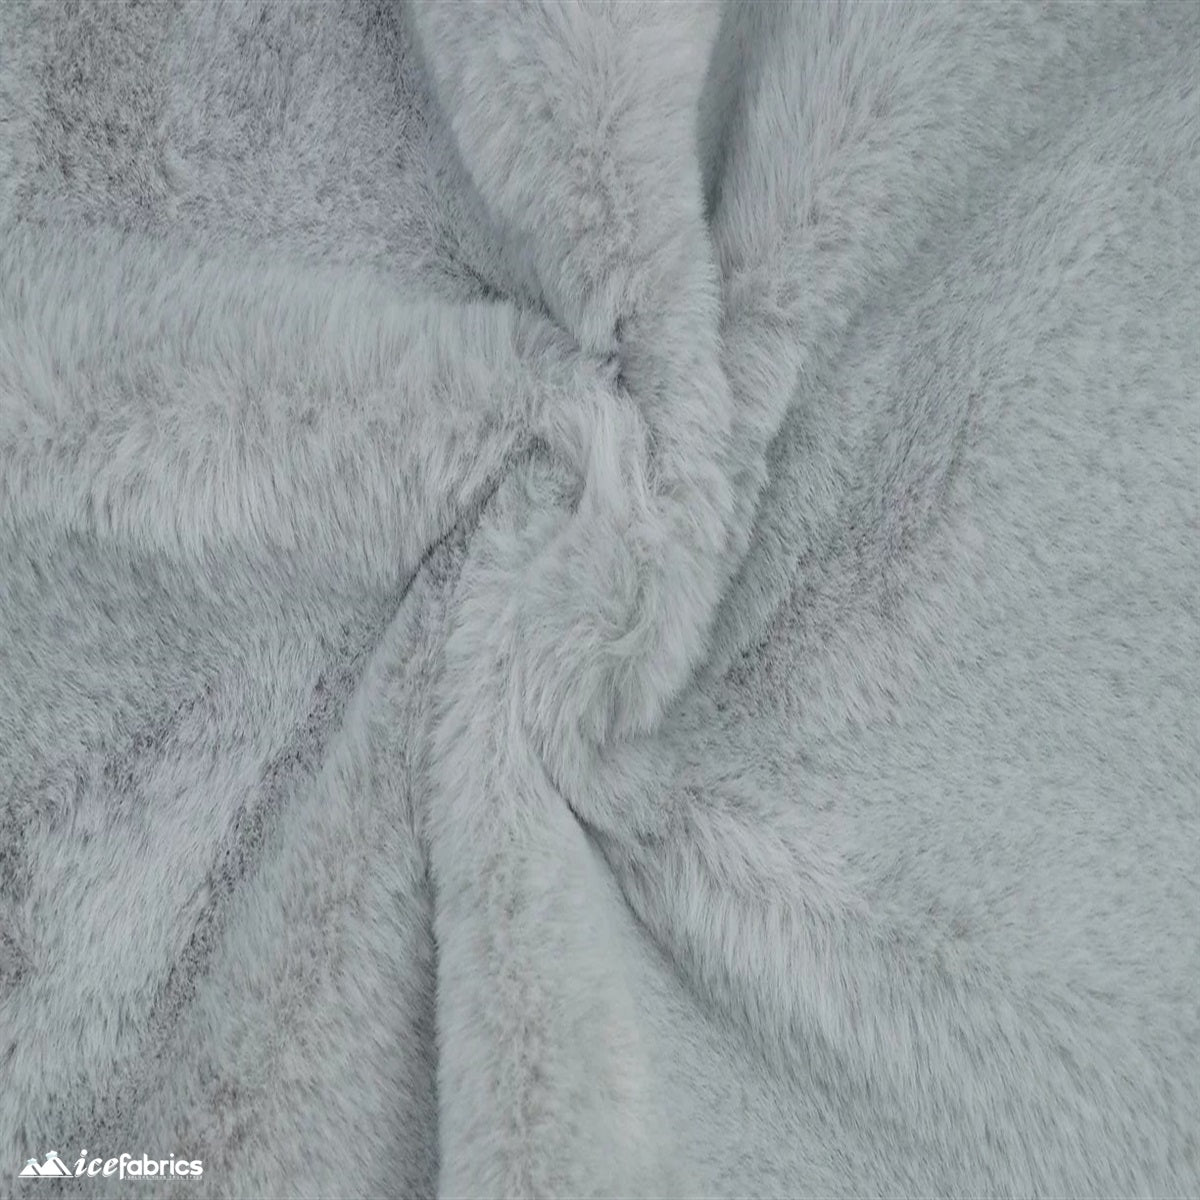 Bunny Thick Faux Fur Minky Fabric / Short Pile / Super SoftICE FABRICSICE FABRICSPlatinumBy The Yard (60 inches Wide)Bunny Thick Faux Fur Minky Fabric / Short Pile / Super Soft ICE FABRICS Platinum